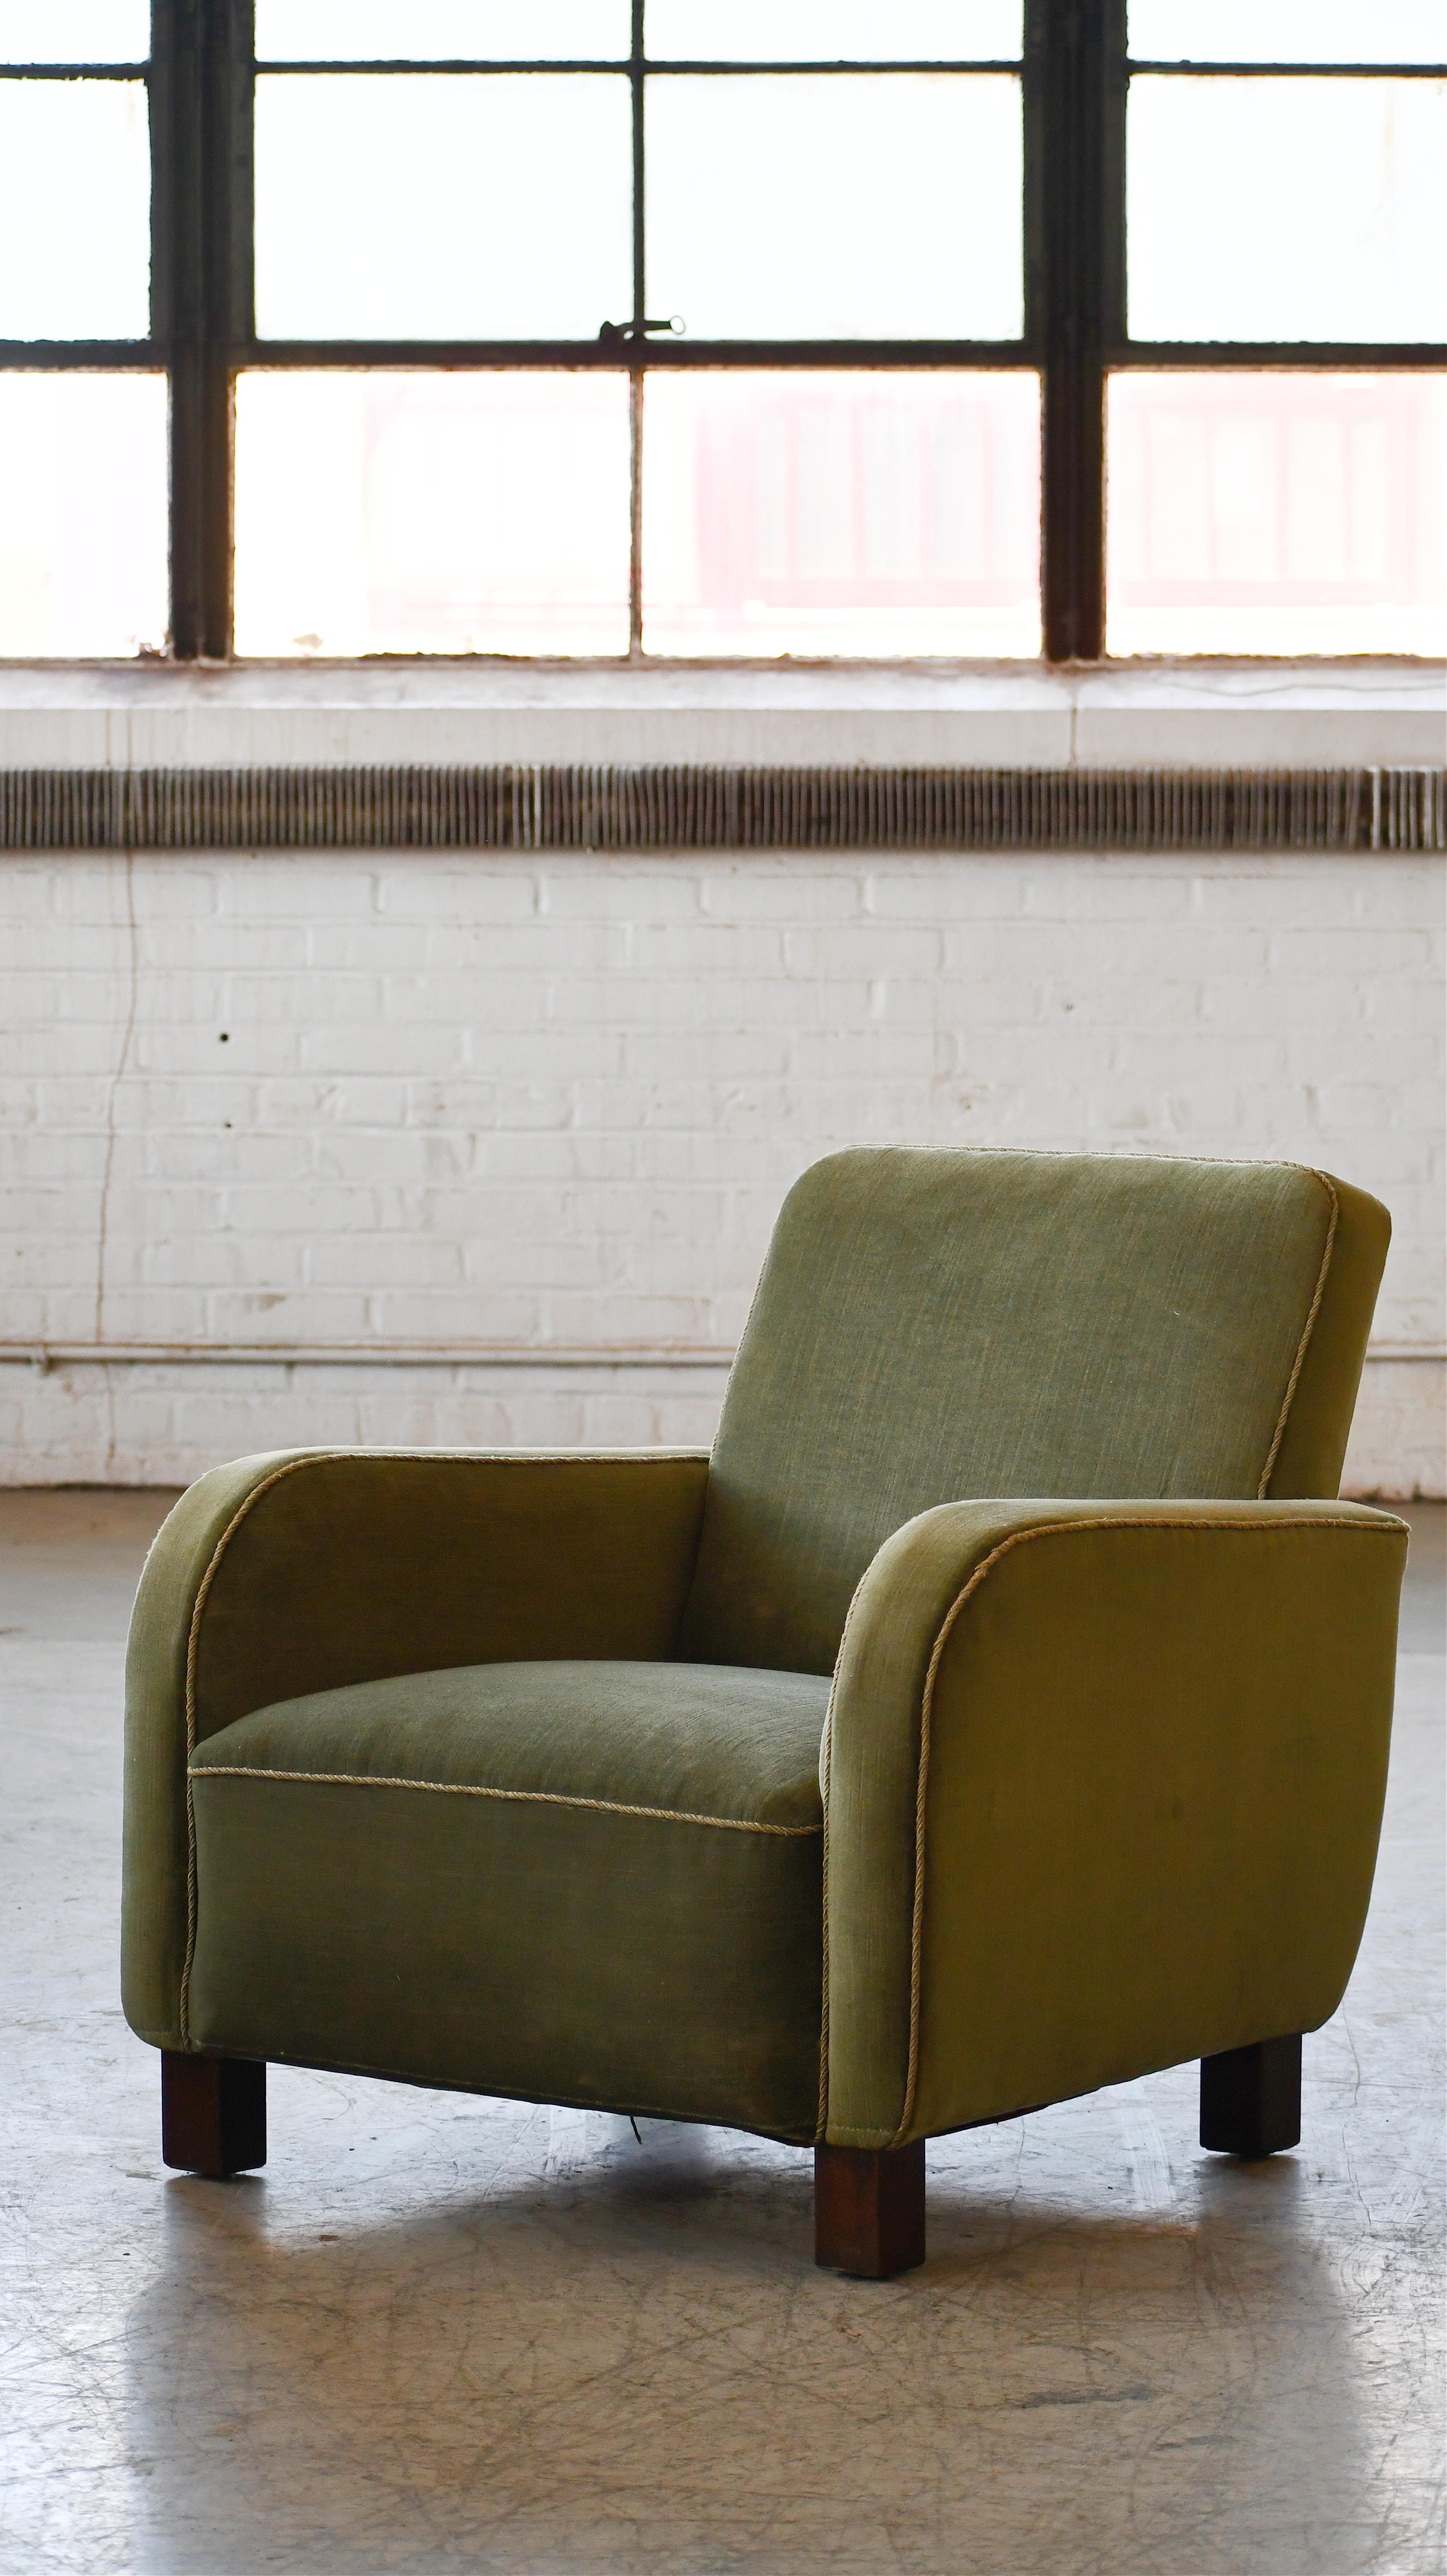 Mid-Century Modern 1930-40s Danish Art Deco or Early Midcentury Lounge Chair in Green Mohair For Sale